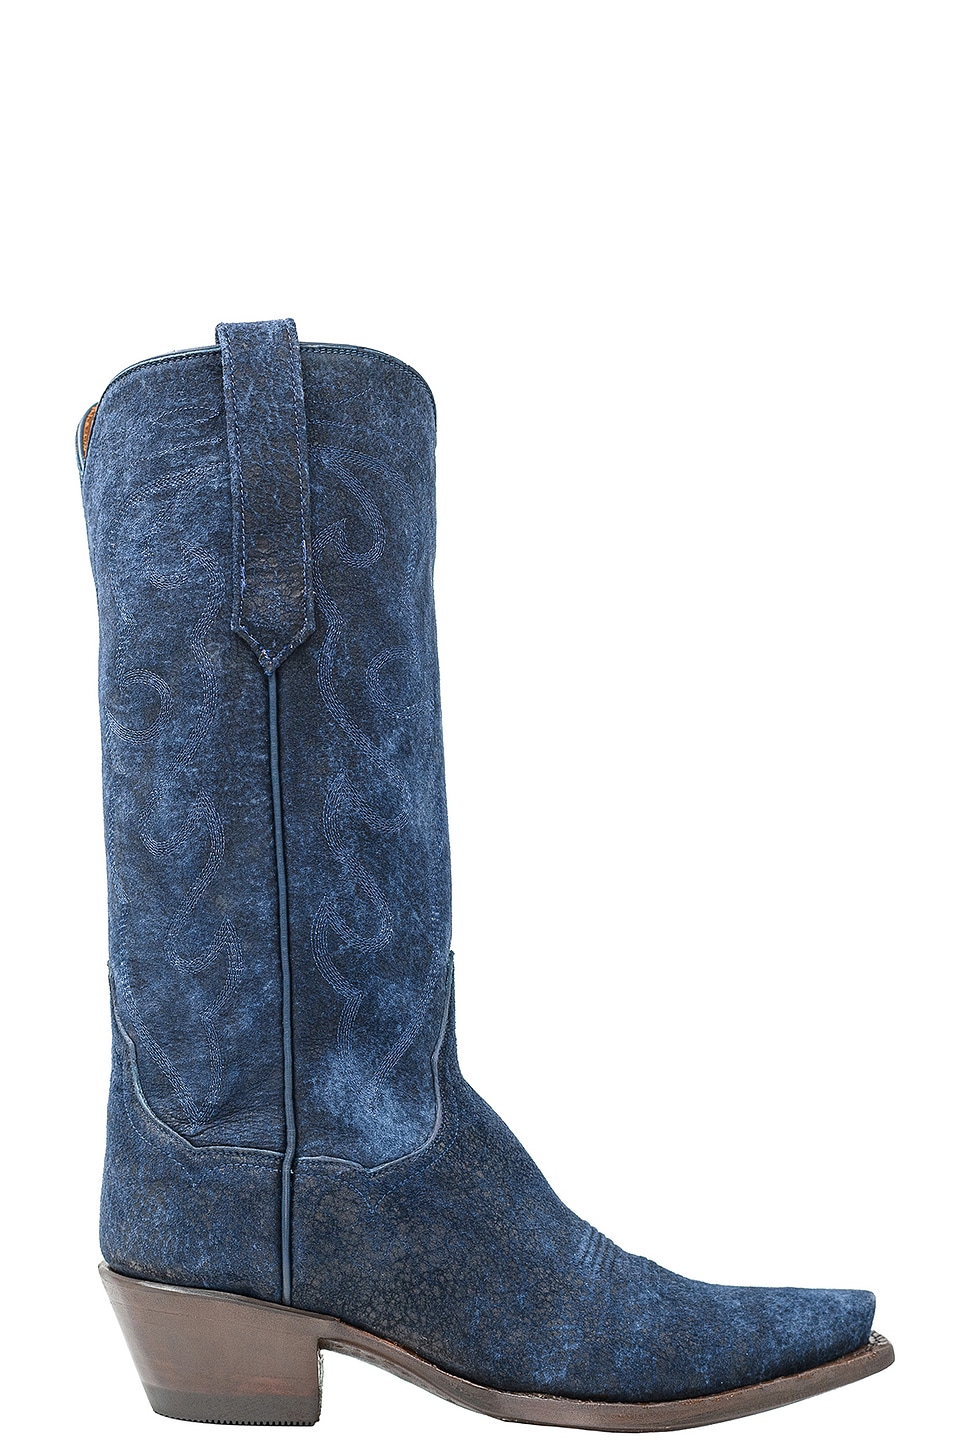 Image 1 of Kemo Sabe Eastwood Boot in Distressed Navy